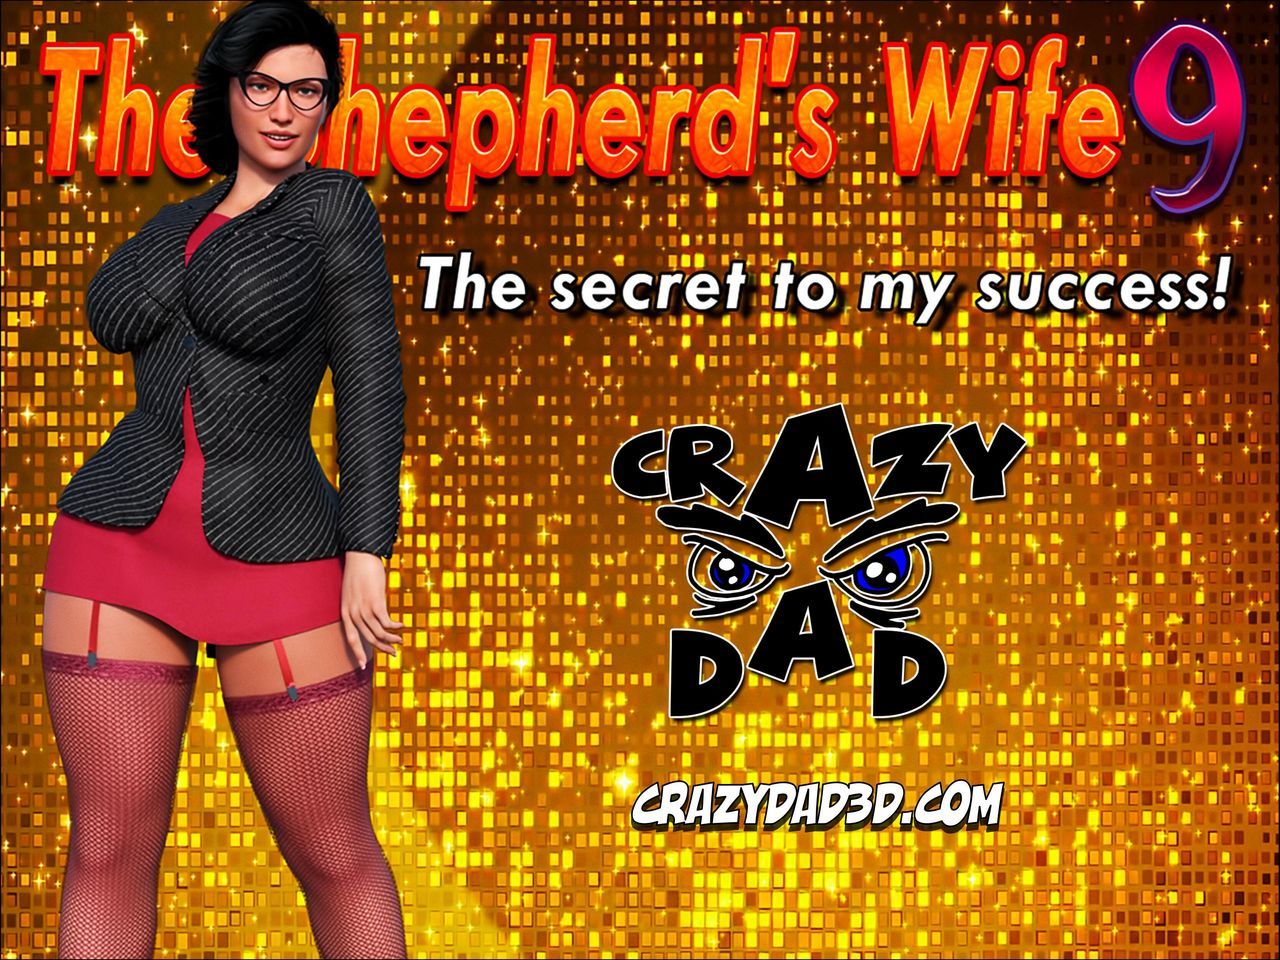 The Shepherds Wife 9 CrazyDad3D page 1